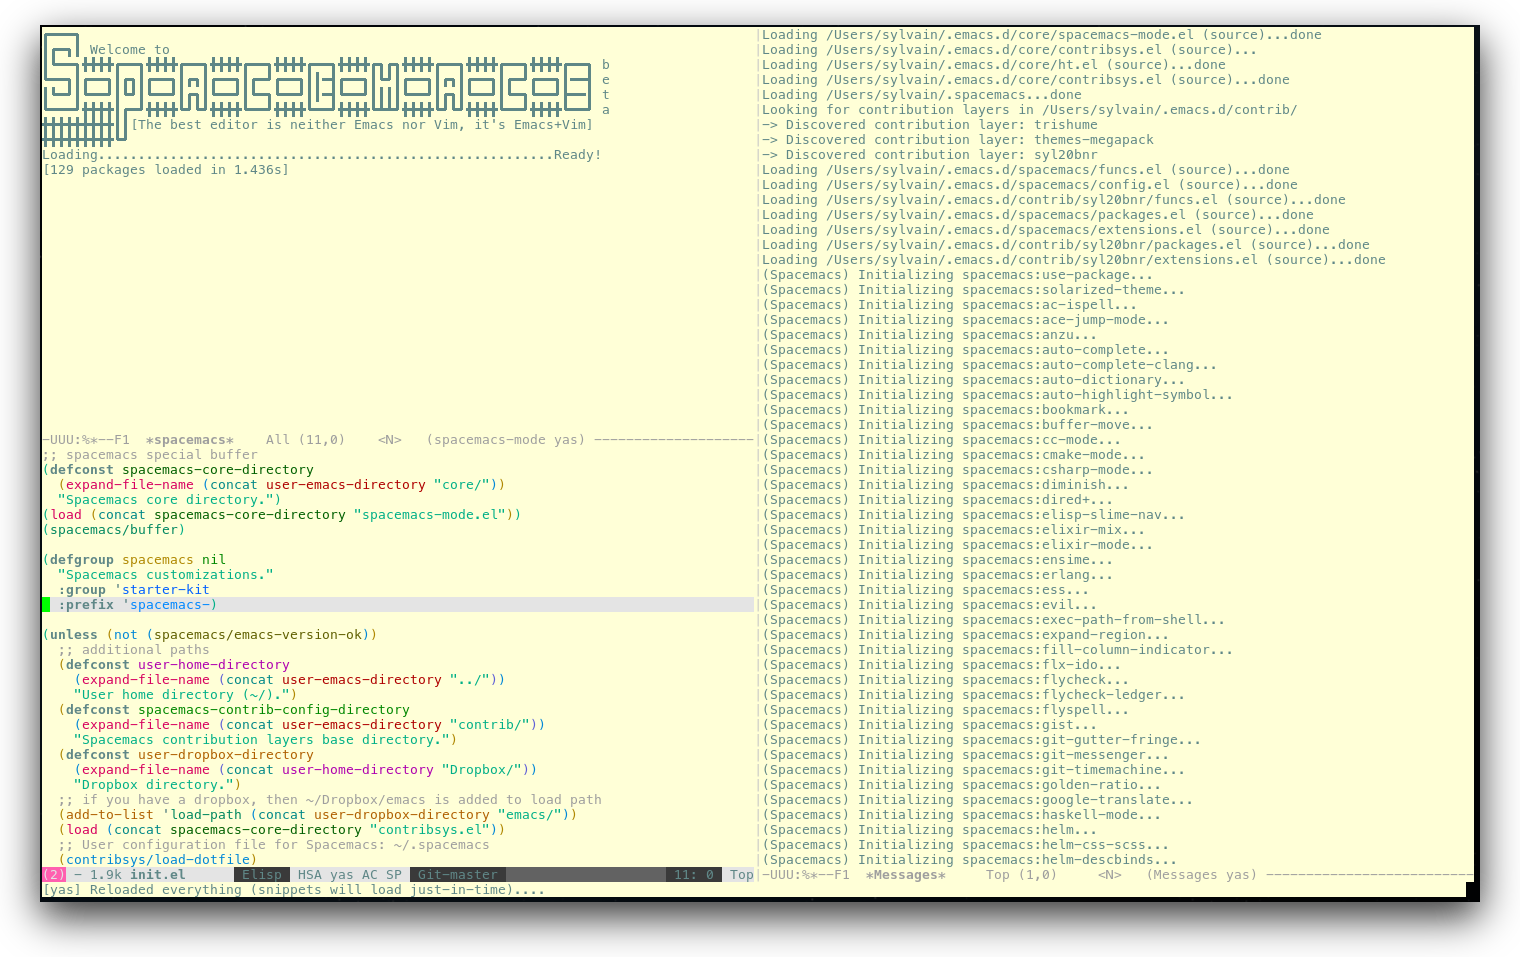 /TakeV/spacemacs/media/commit/91947406f8901c19a38db174f3704c5d66bf6de1/doc/img/spacemacs-urxvt.png